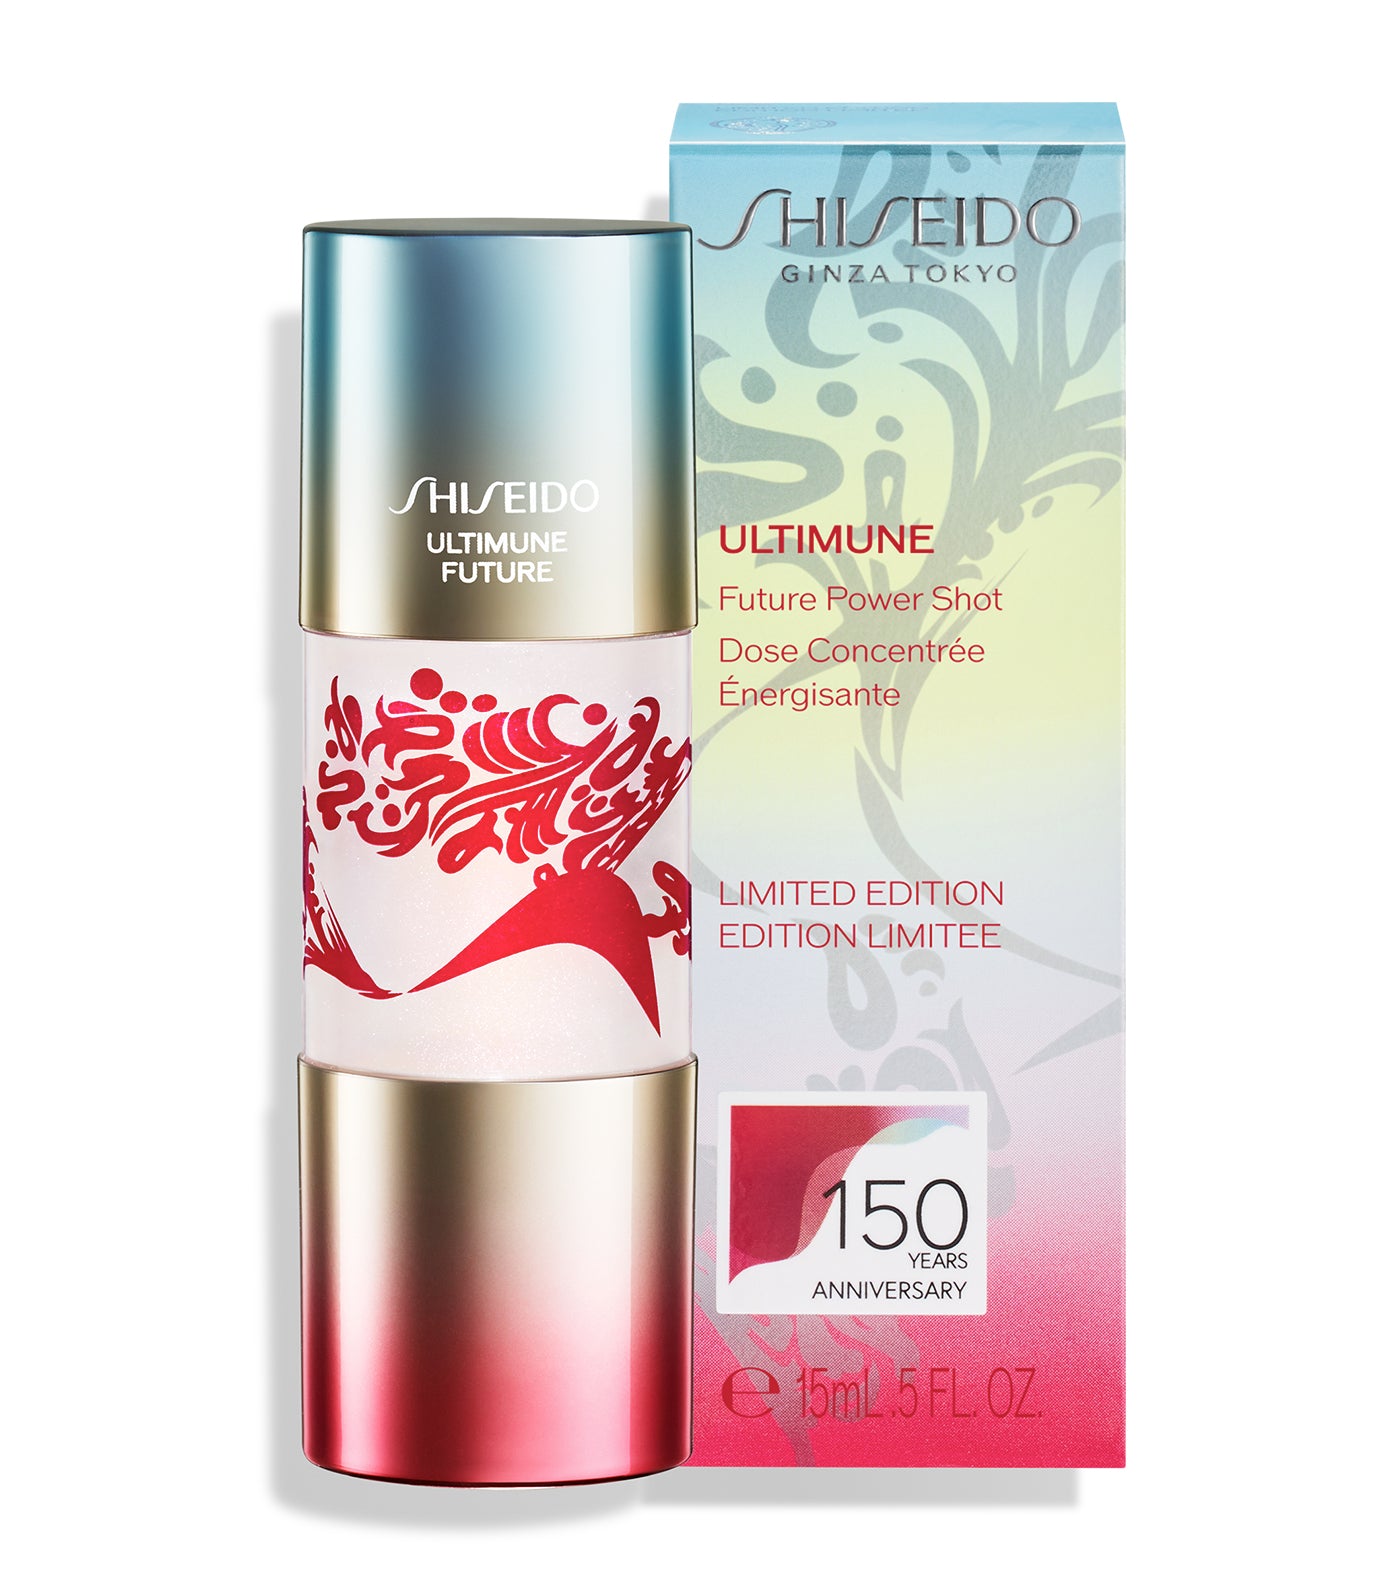 Ultimune Future Power Shot - 150th Anniversary Limited Edition